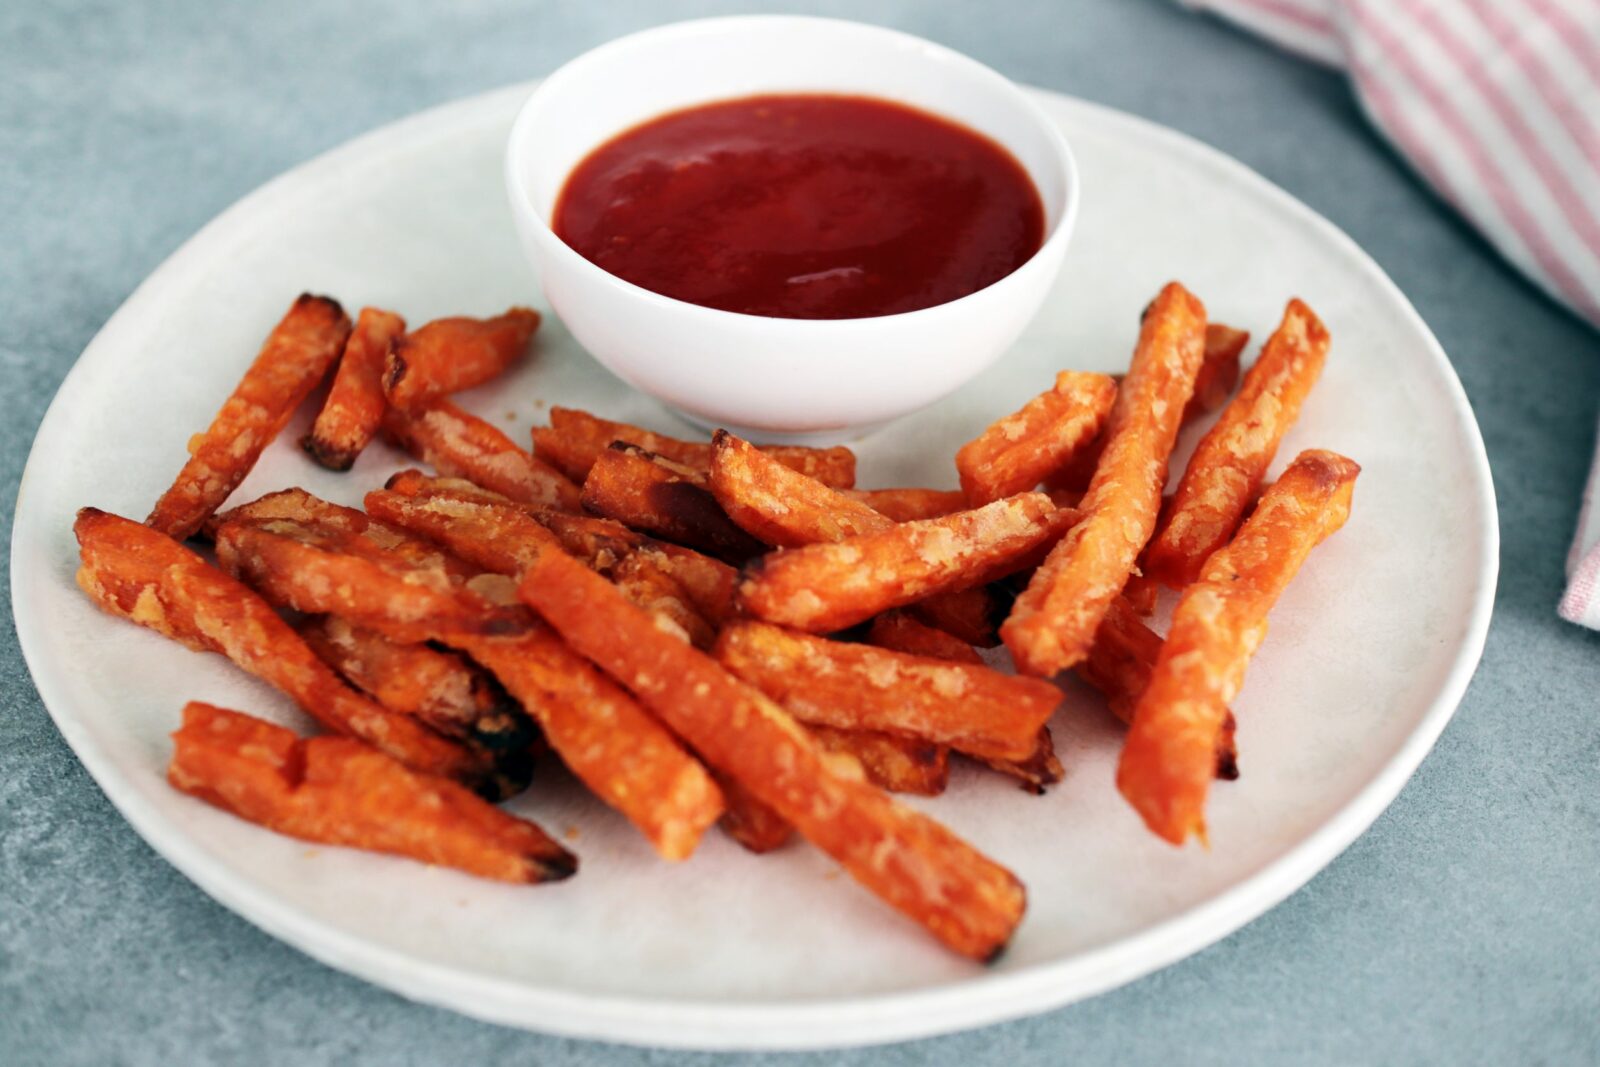 Home made ketchup with sweet potato fries on a plate